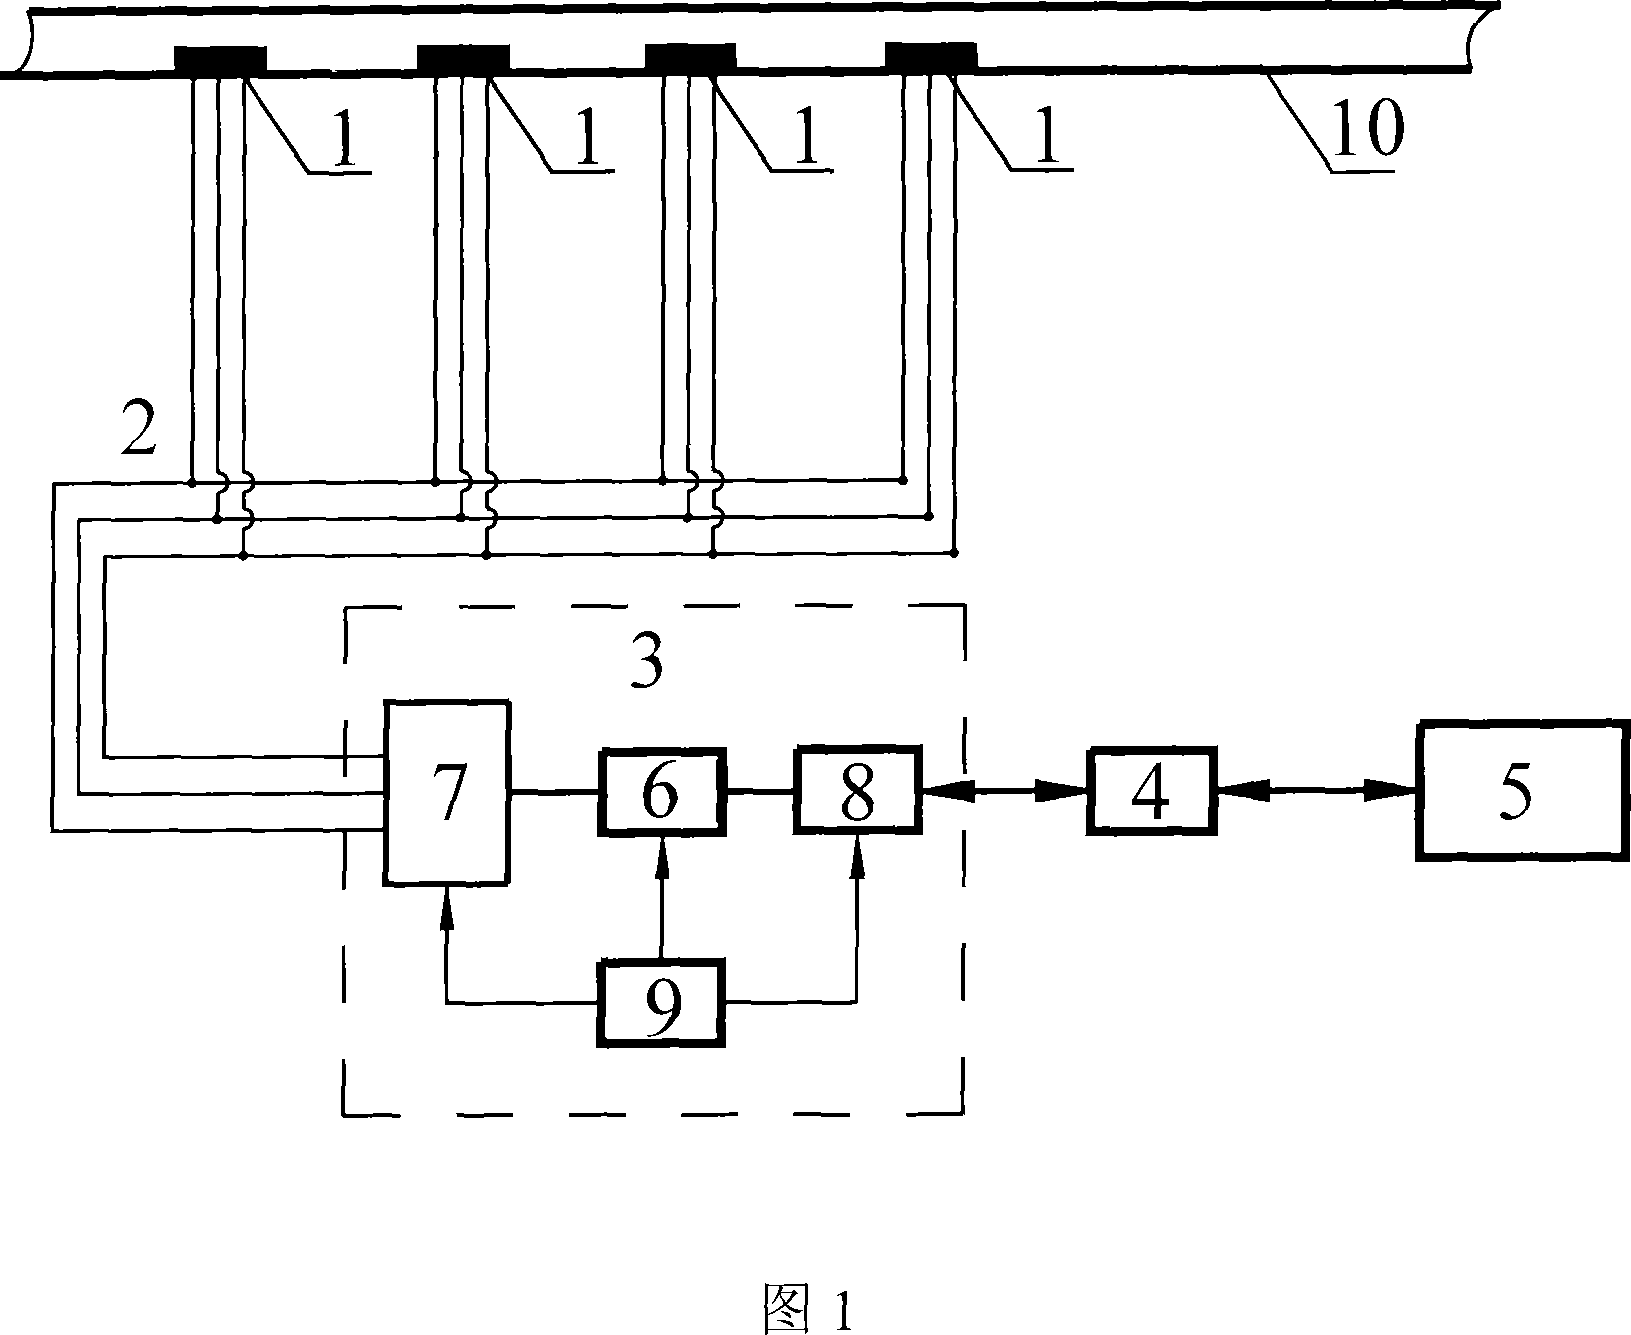 Cable running safety monitoring method